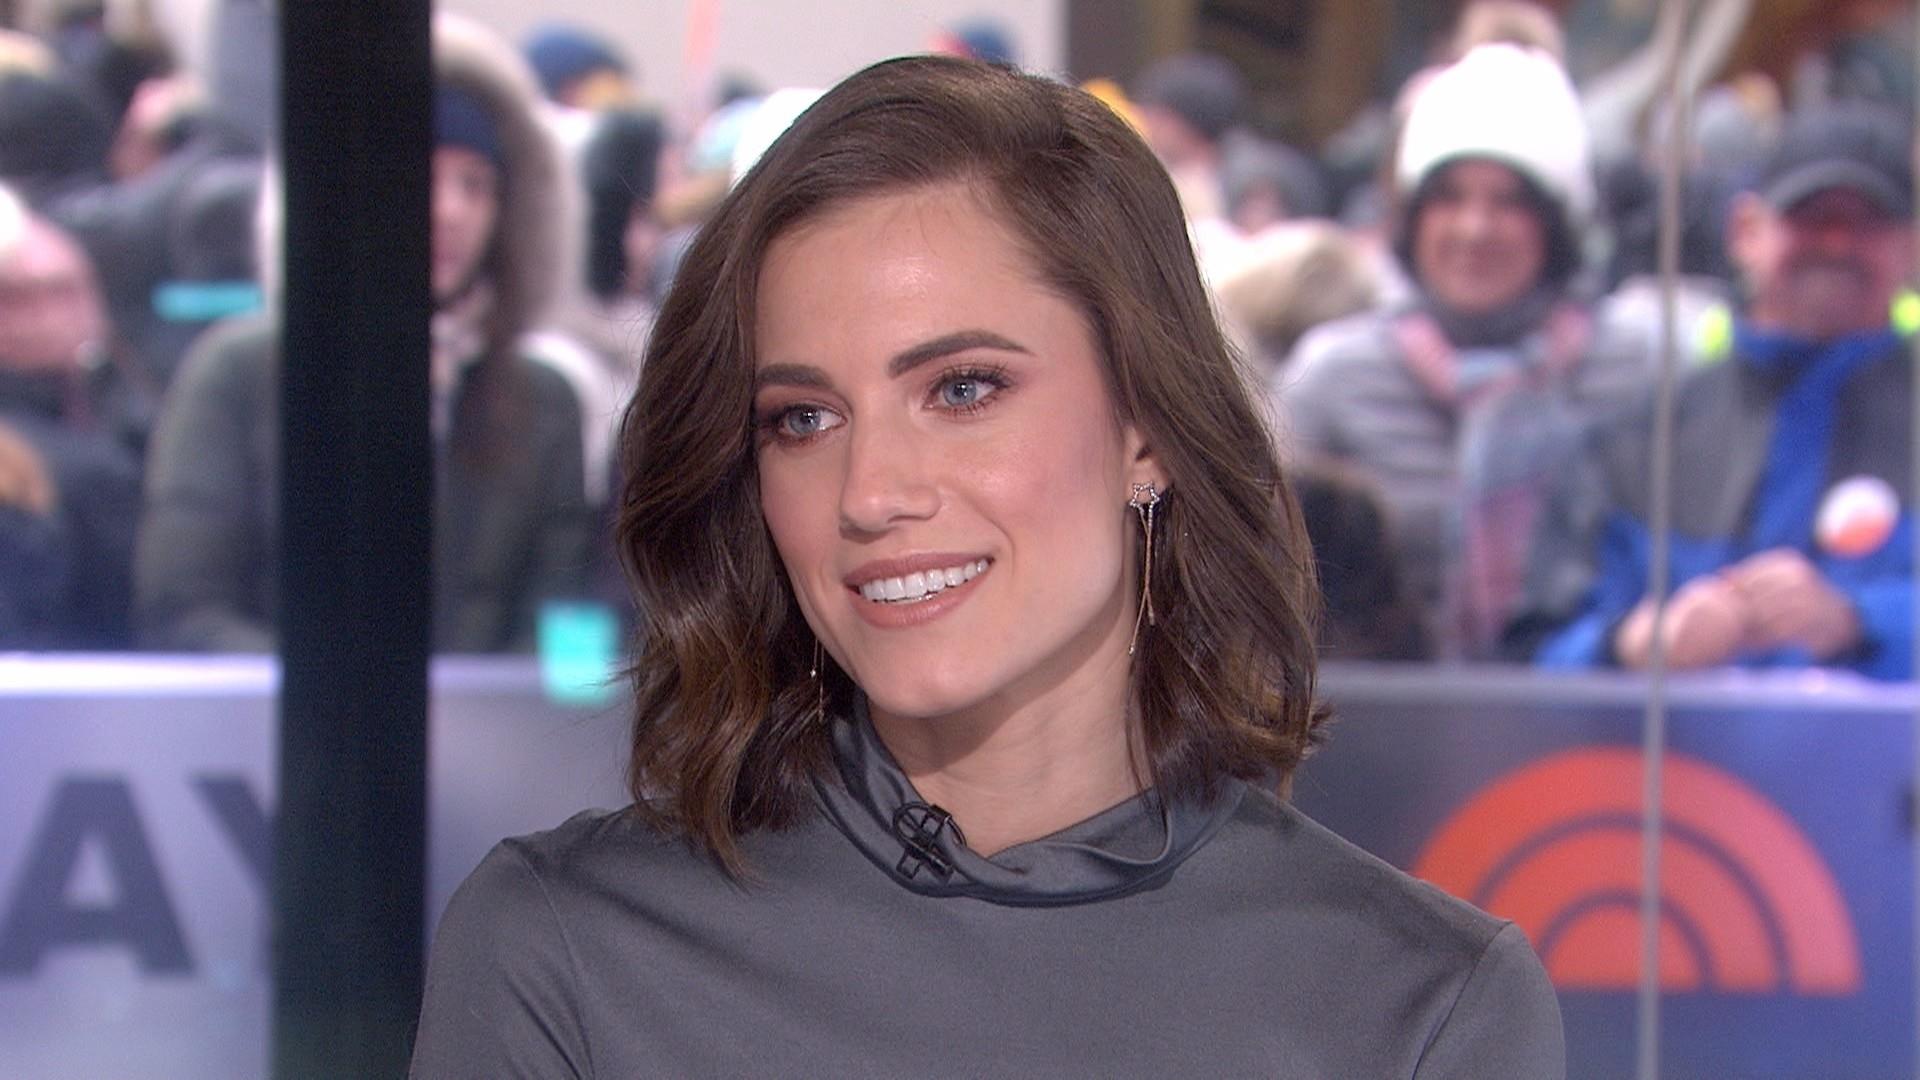 Allison Williams on her secret role in 'A Series of Unfortunate Events...